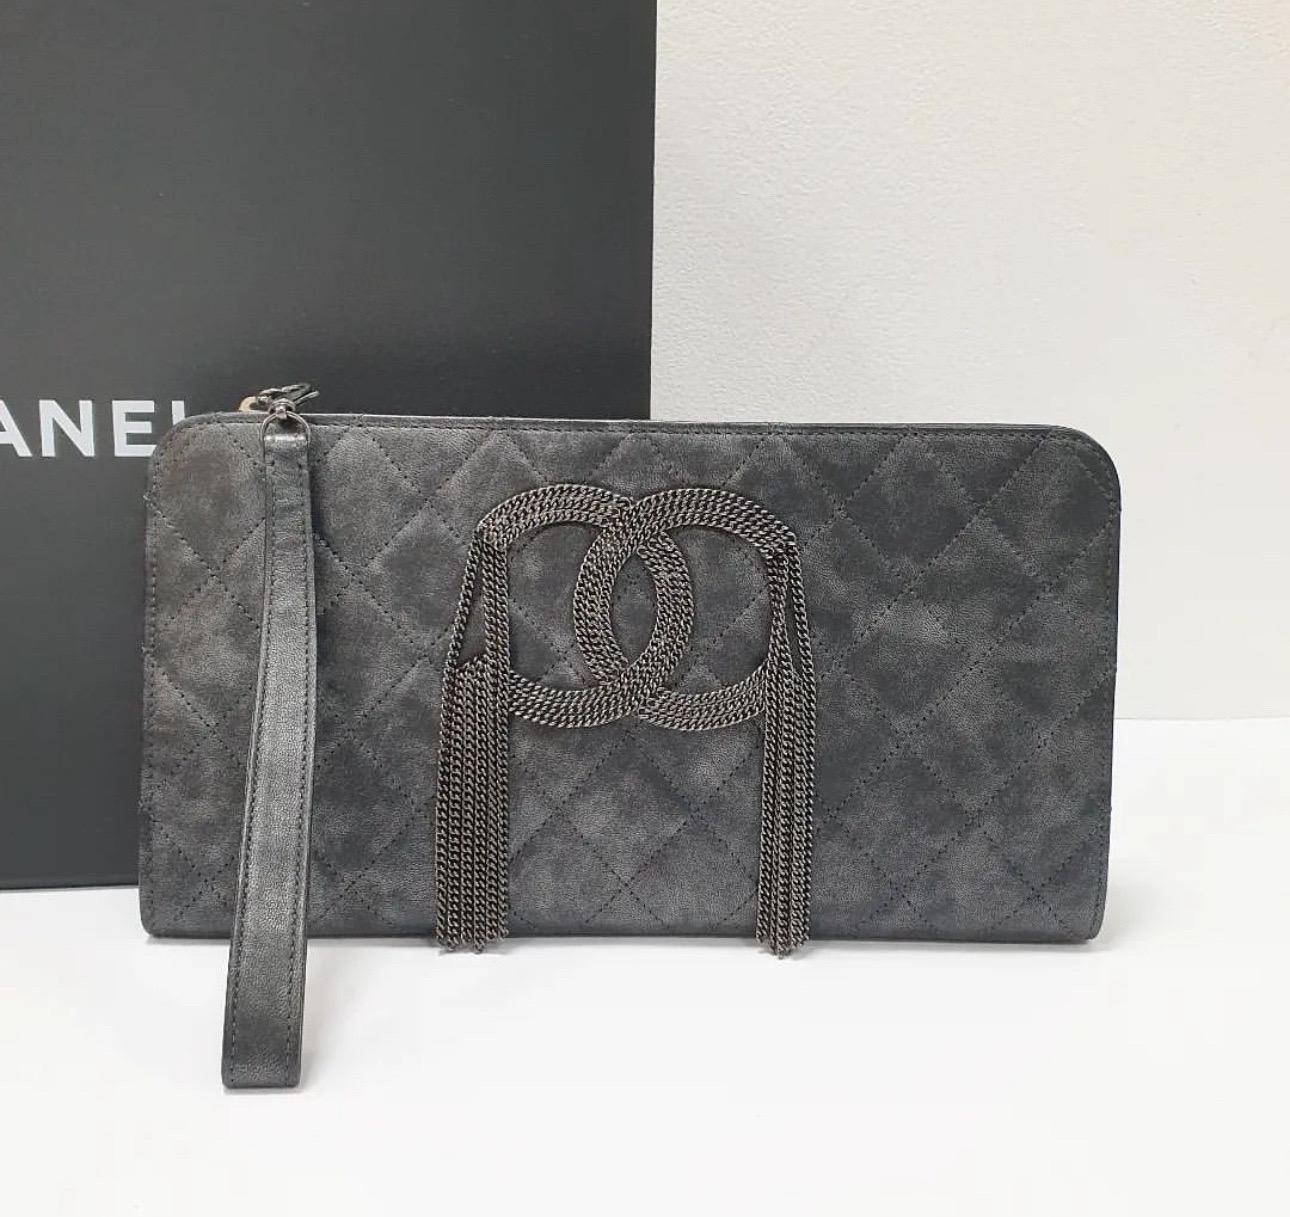 Chanel Metallic Quilted Calfskin Chain CC Wristlet Clutch In Good Condition For Sale In Krakow, PL